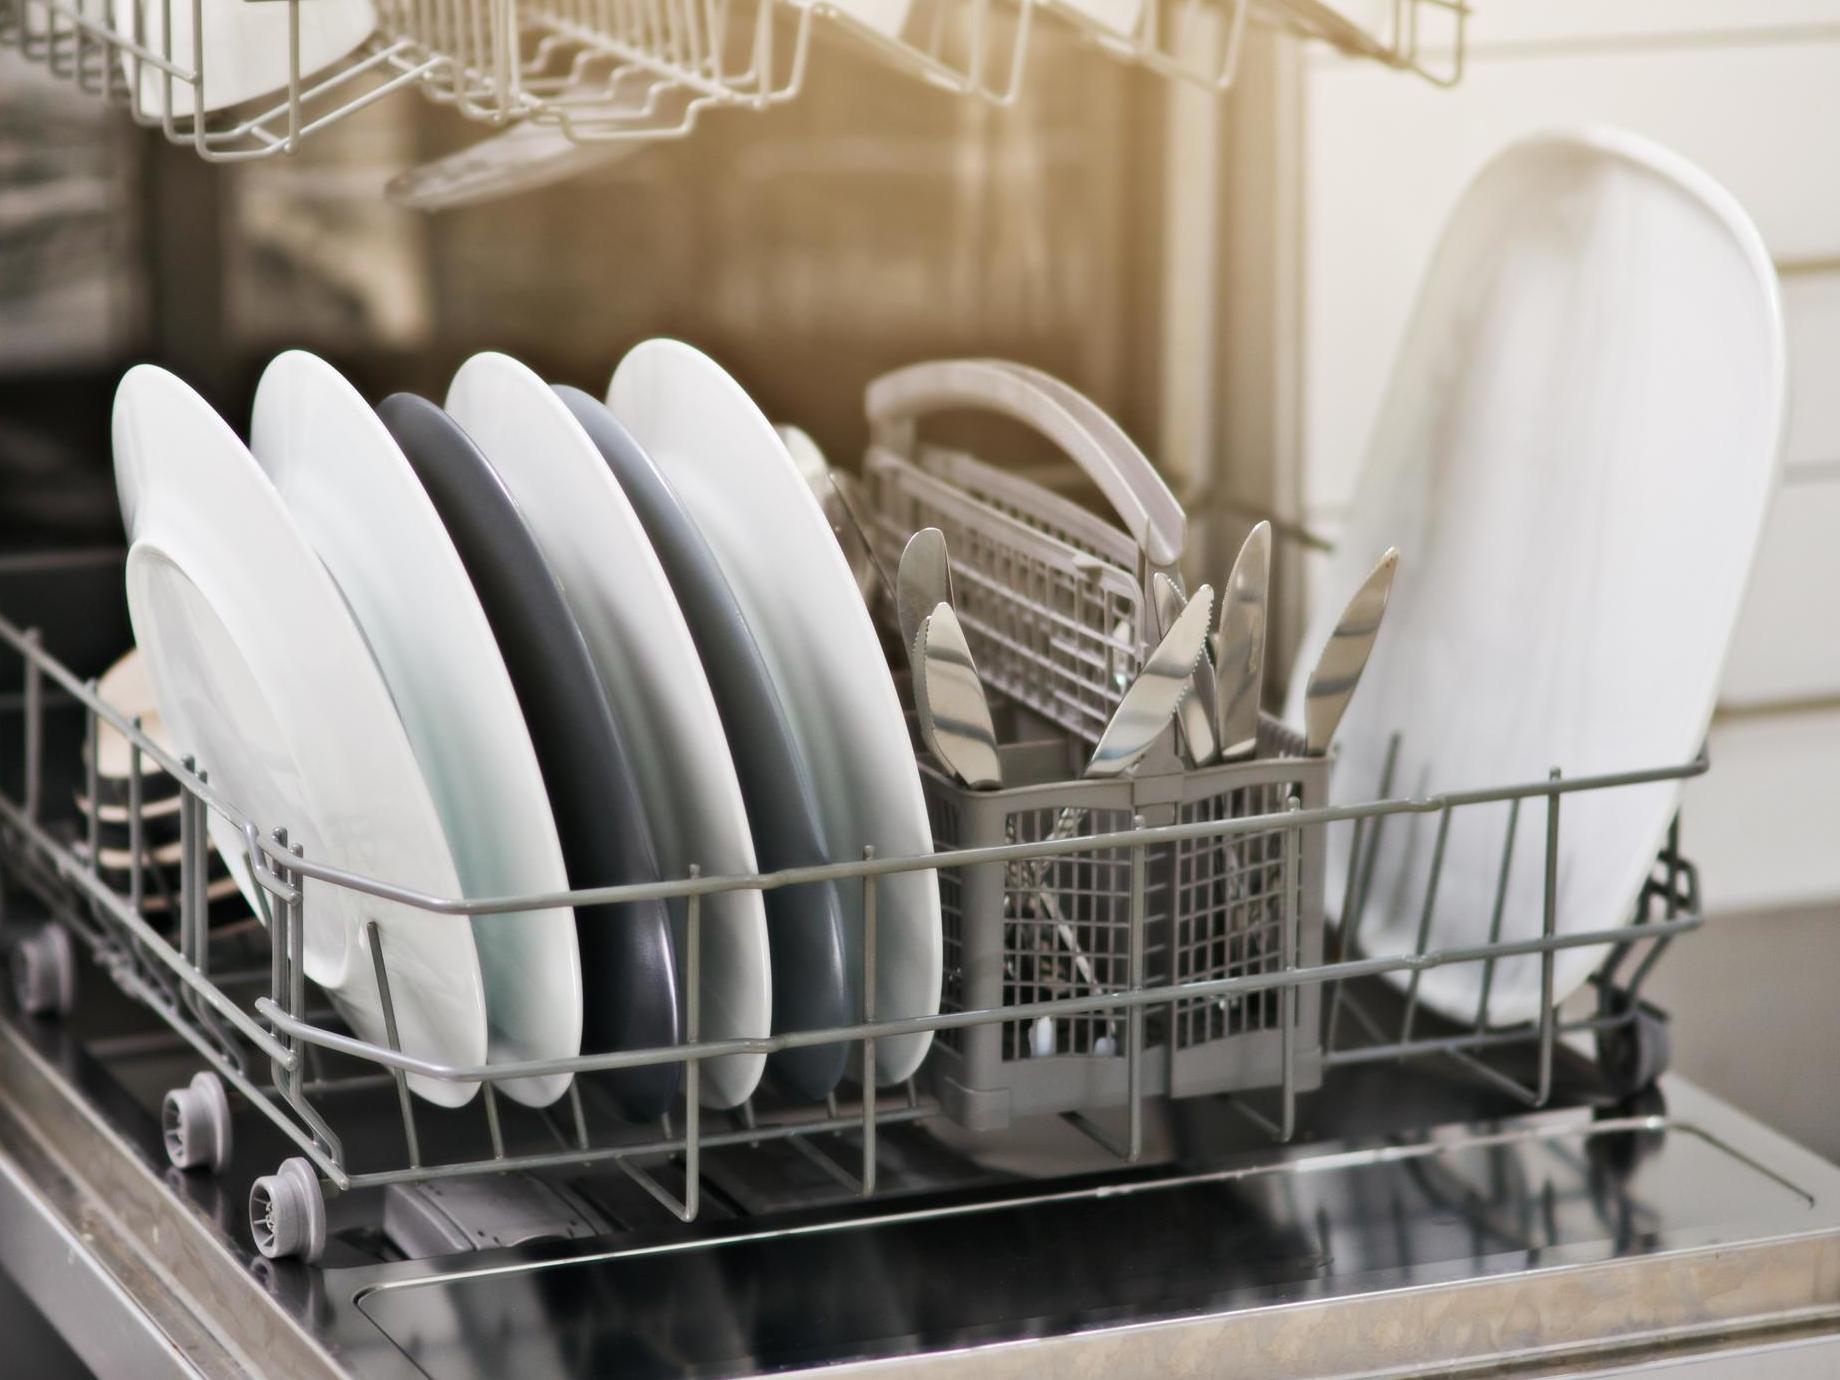 A Korean retailer has said dishwashers have seen the 'most significant growth' in the first half of 2020